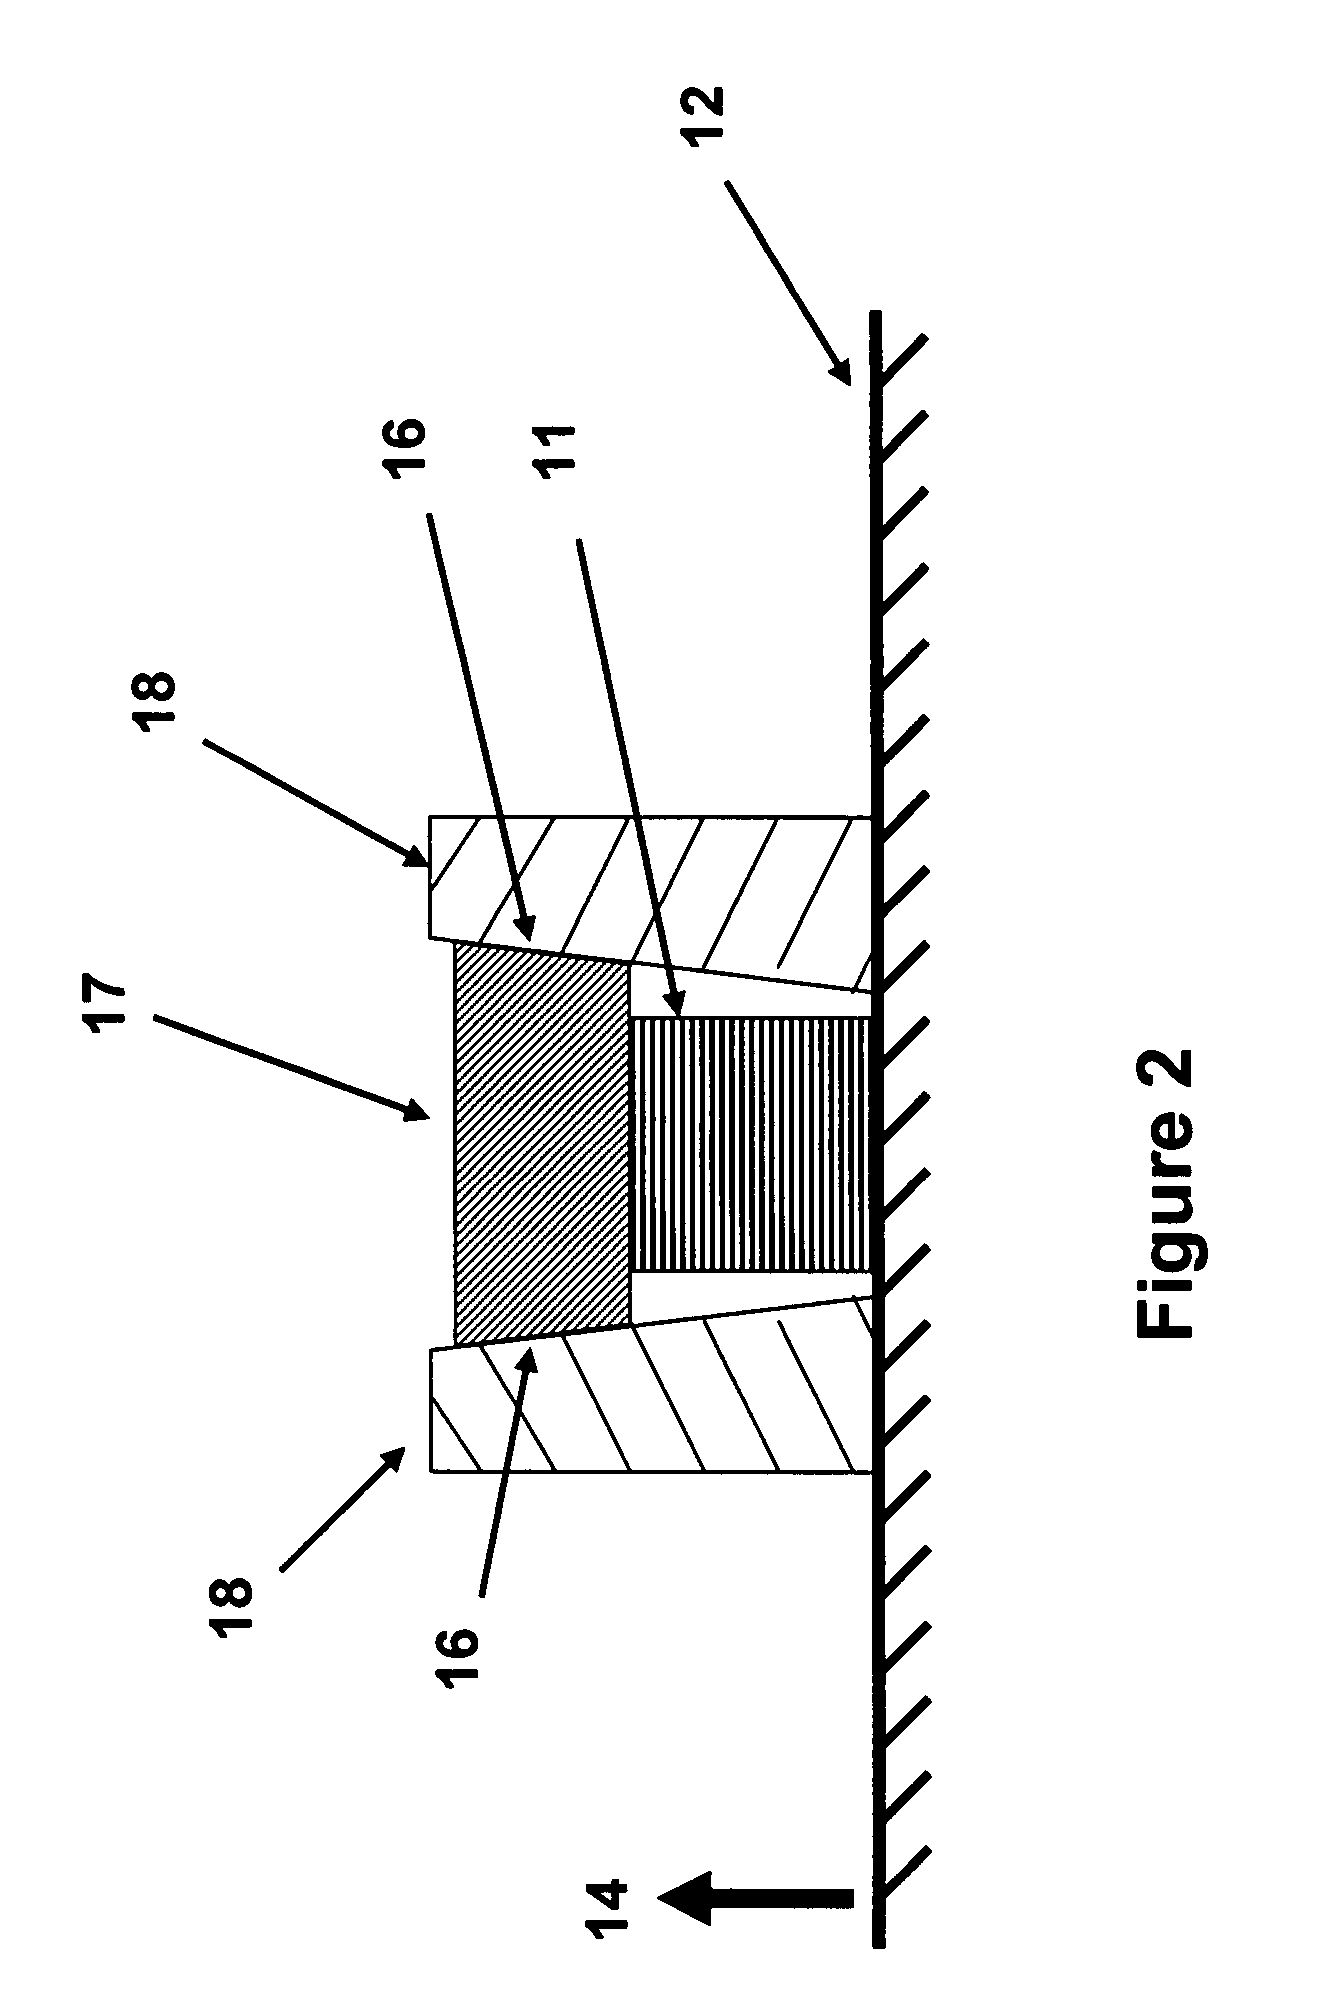 Piezoelectric generators for munitions fuzing and the like